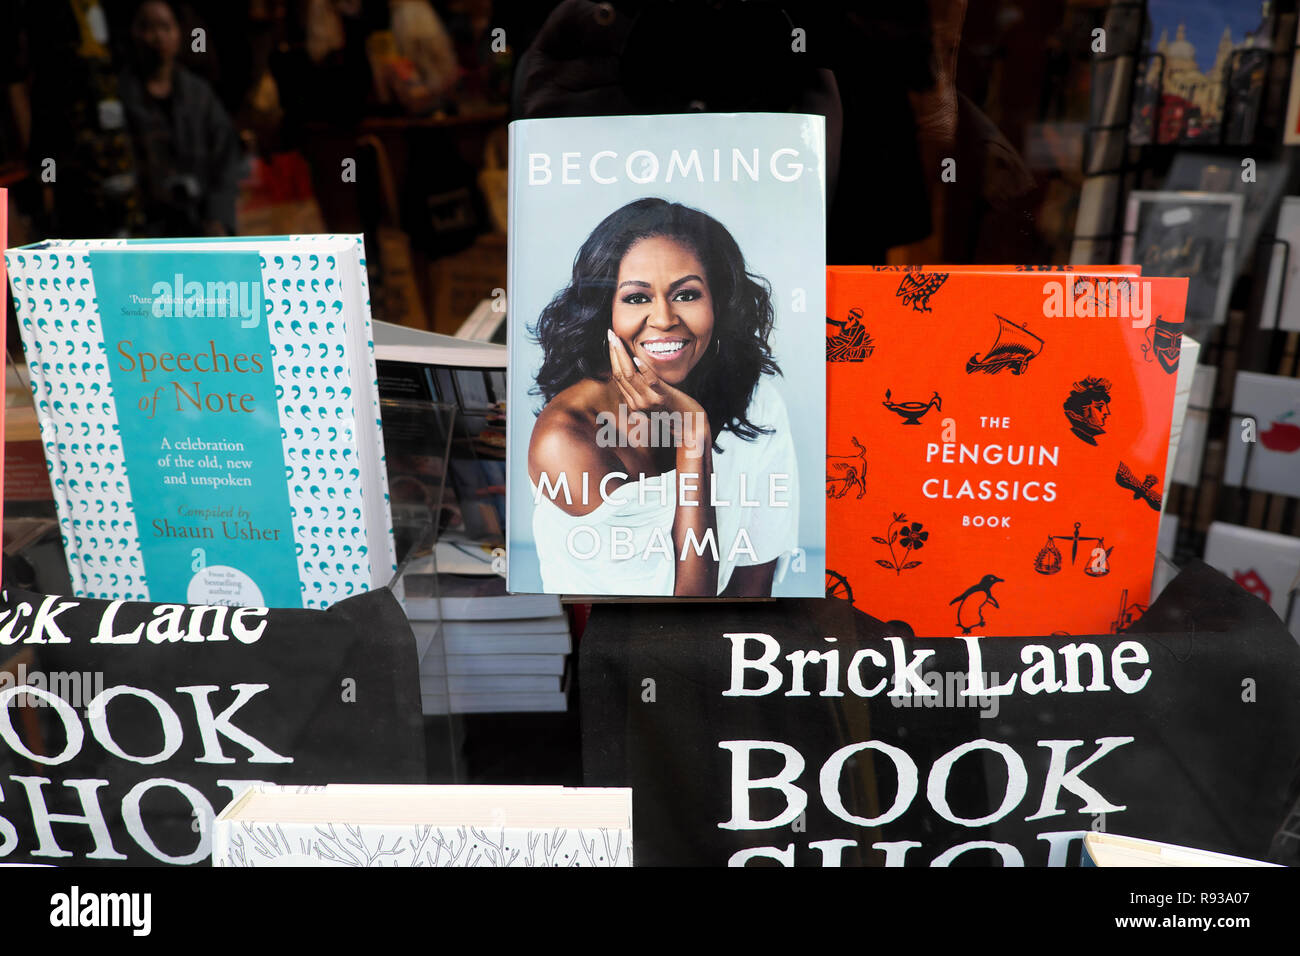 Michelle Obama book 'Becoming' on display with Penguin Classics and Speeches of Note in Brick Lane Book Shop window Shoreditch London  UK KATHY DEWITT Stock Photo